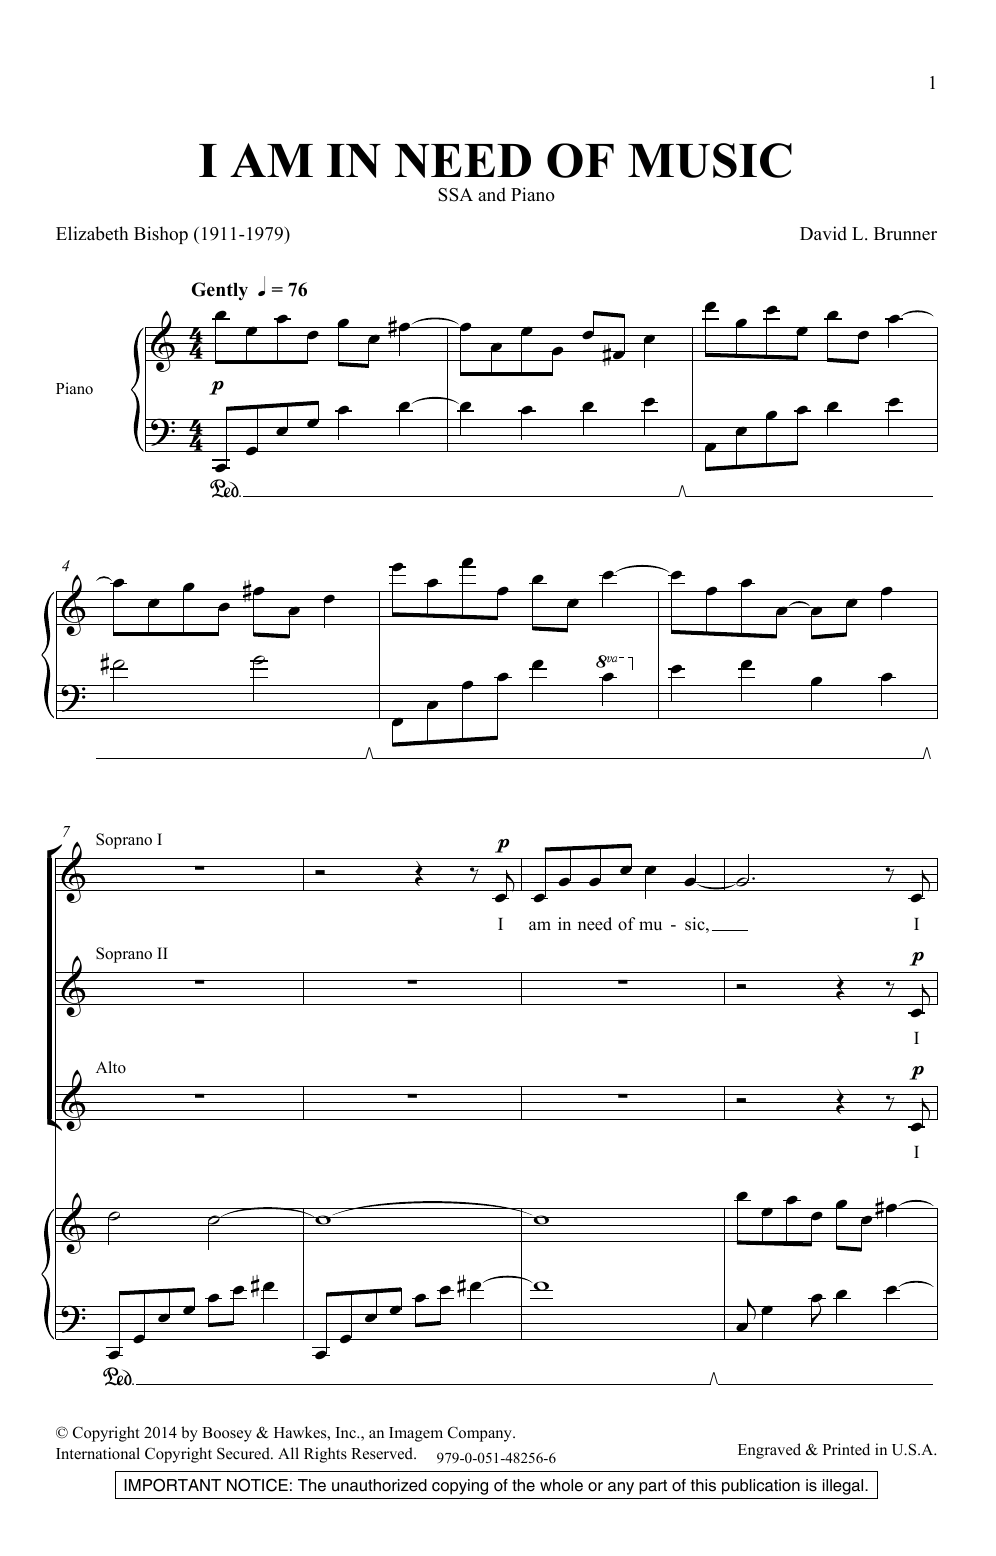 Download David Brunner I Am In Need Of Music Sheet Music